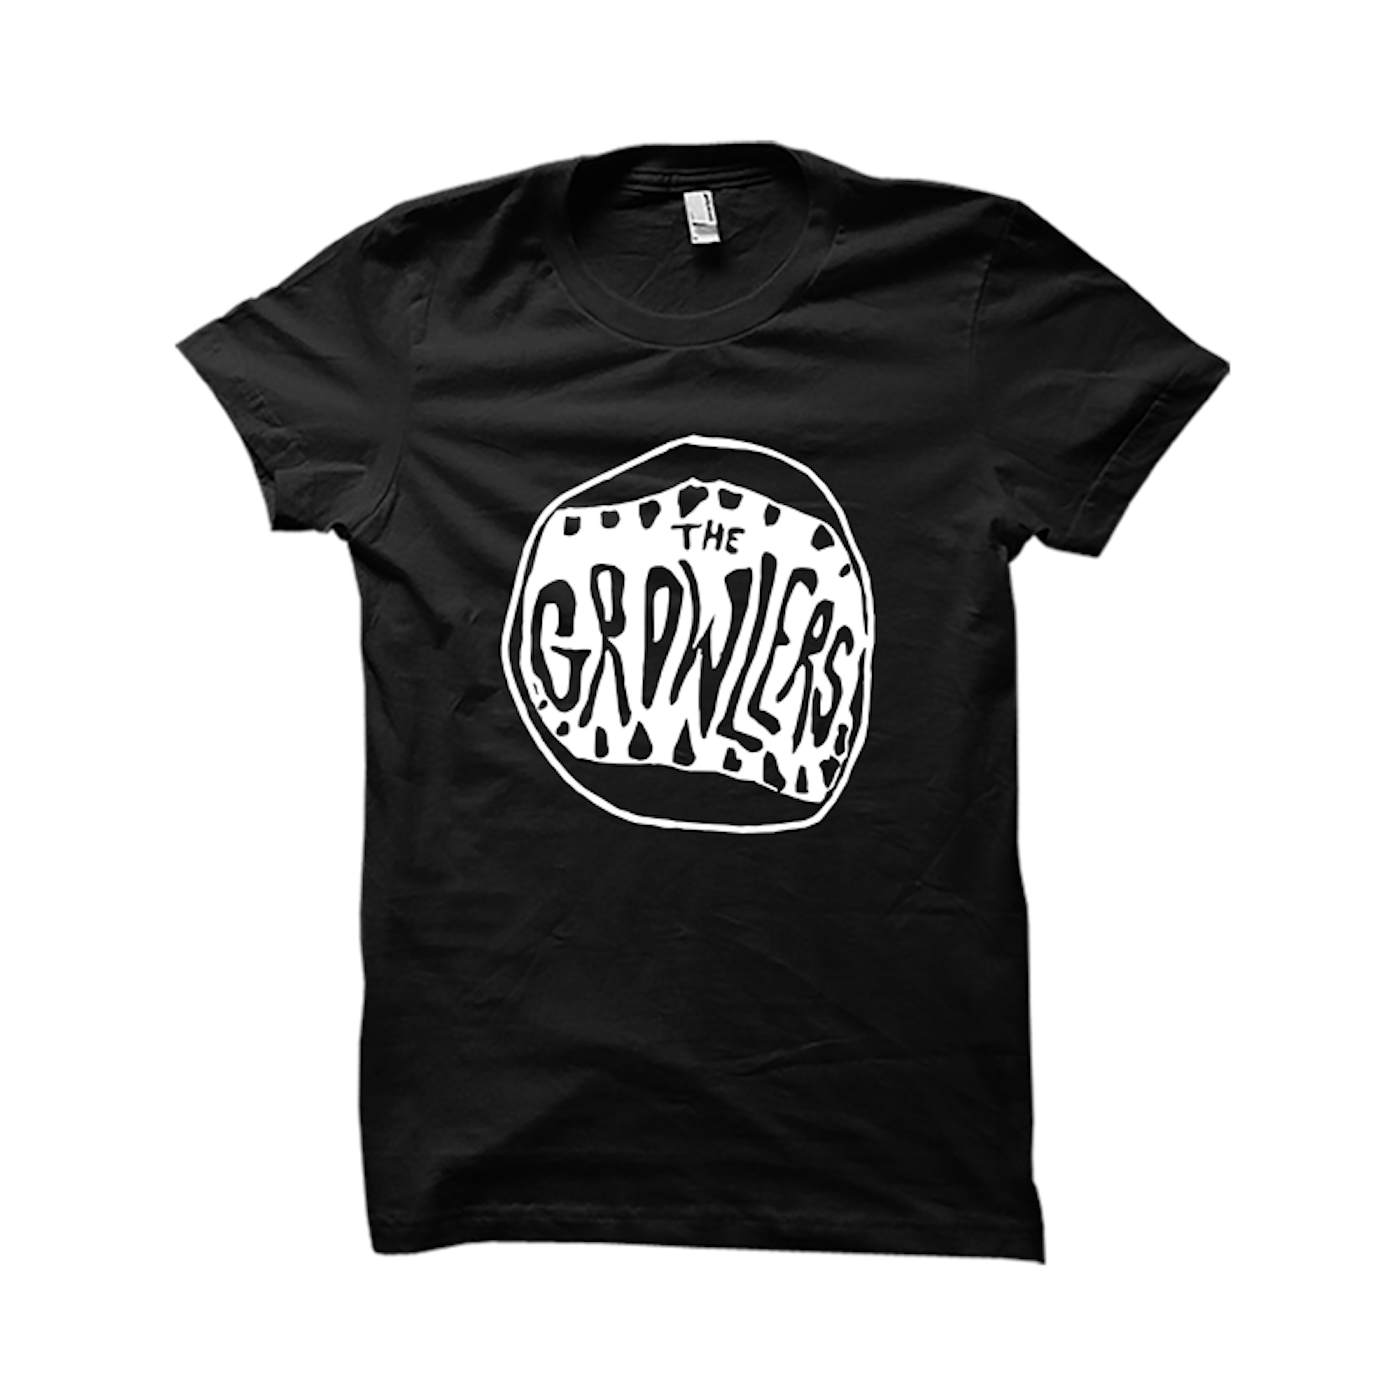 The Growlers Classic Mouth Girls T-Shirt